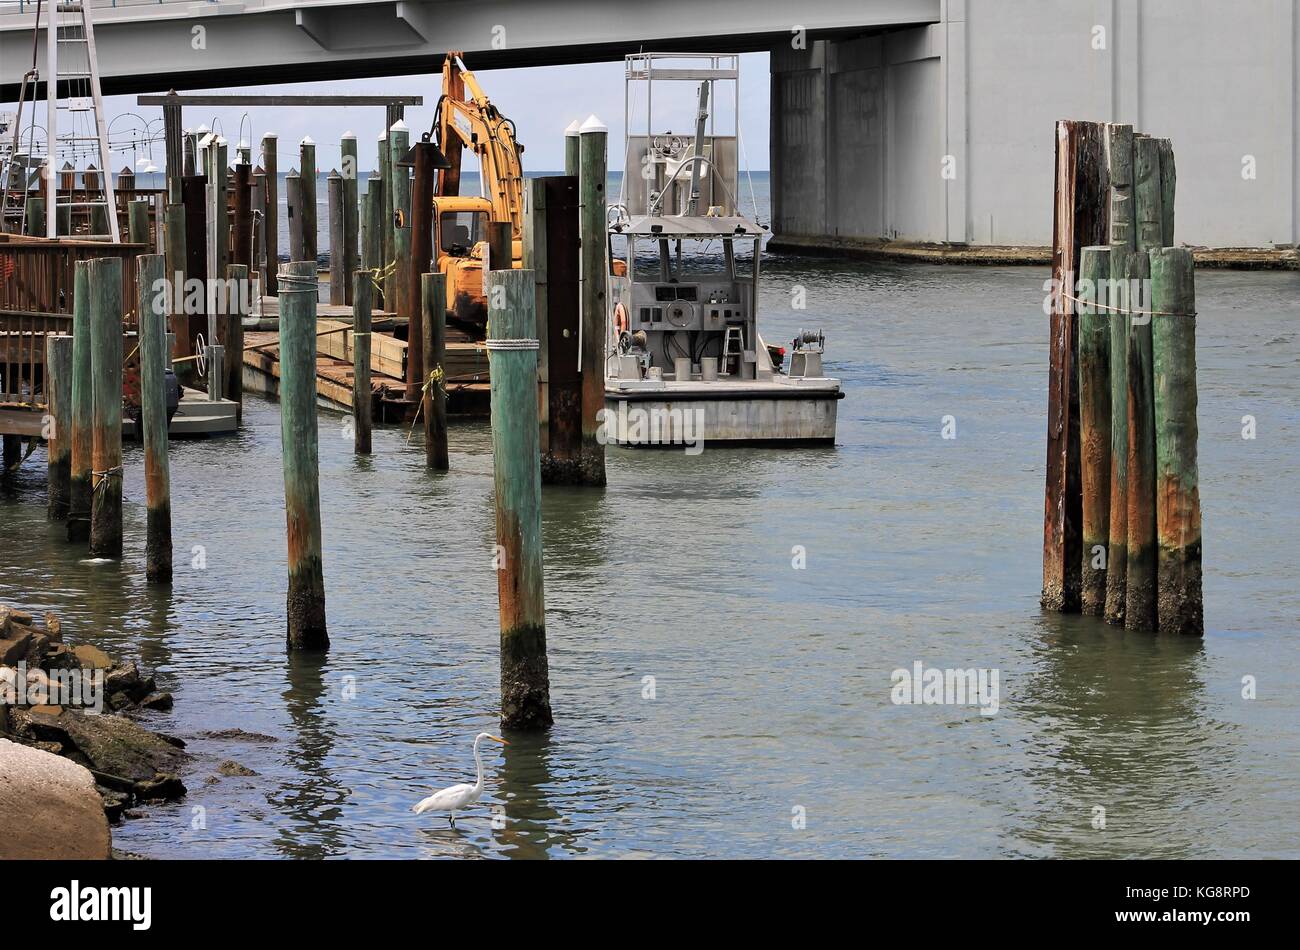 Boat, and barge with excavator dock side at a pier in Treasure Island, Florida. Pilings visible sticking out of the water. Lift bridge in background Stock Photo